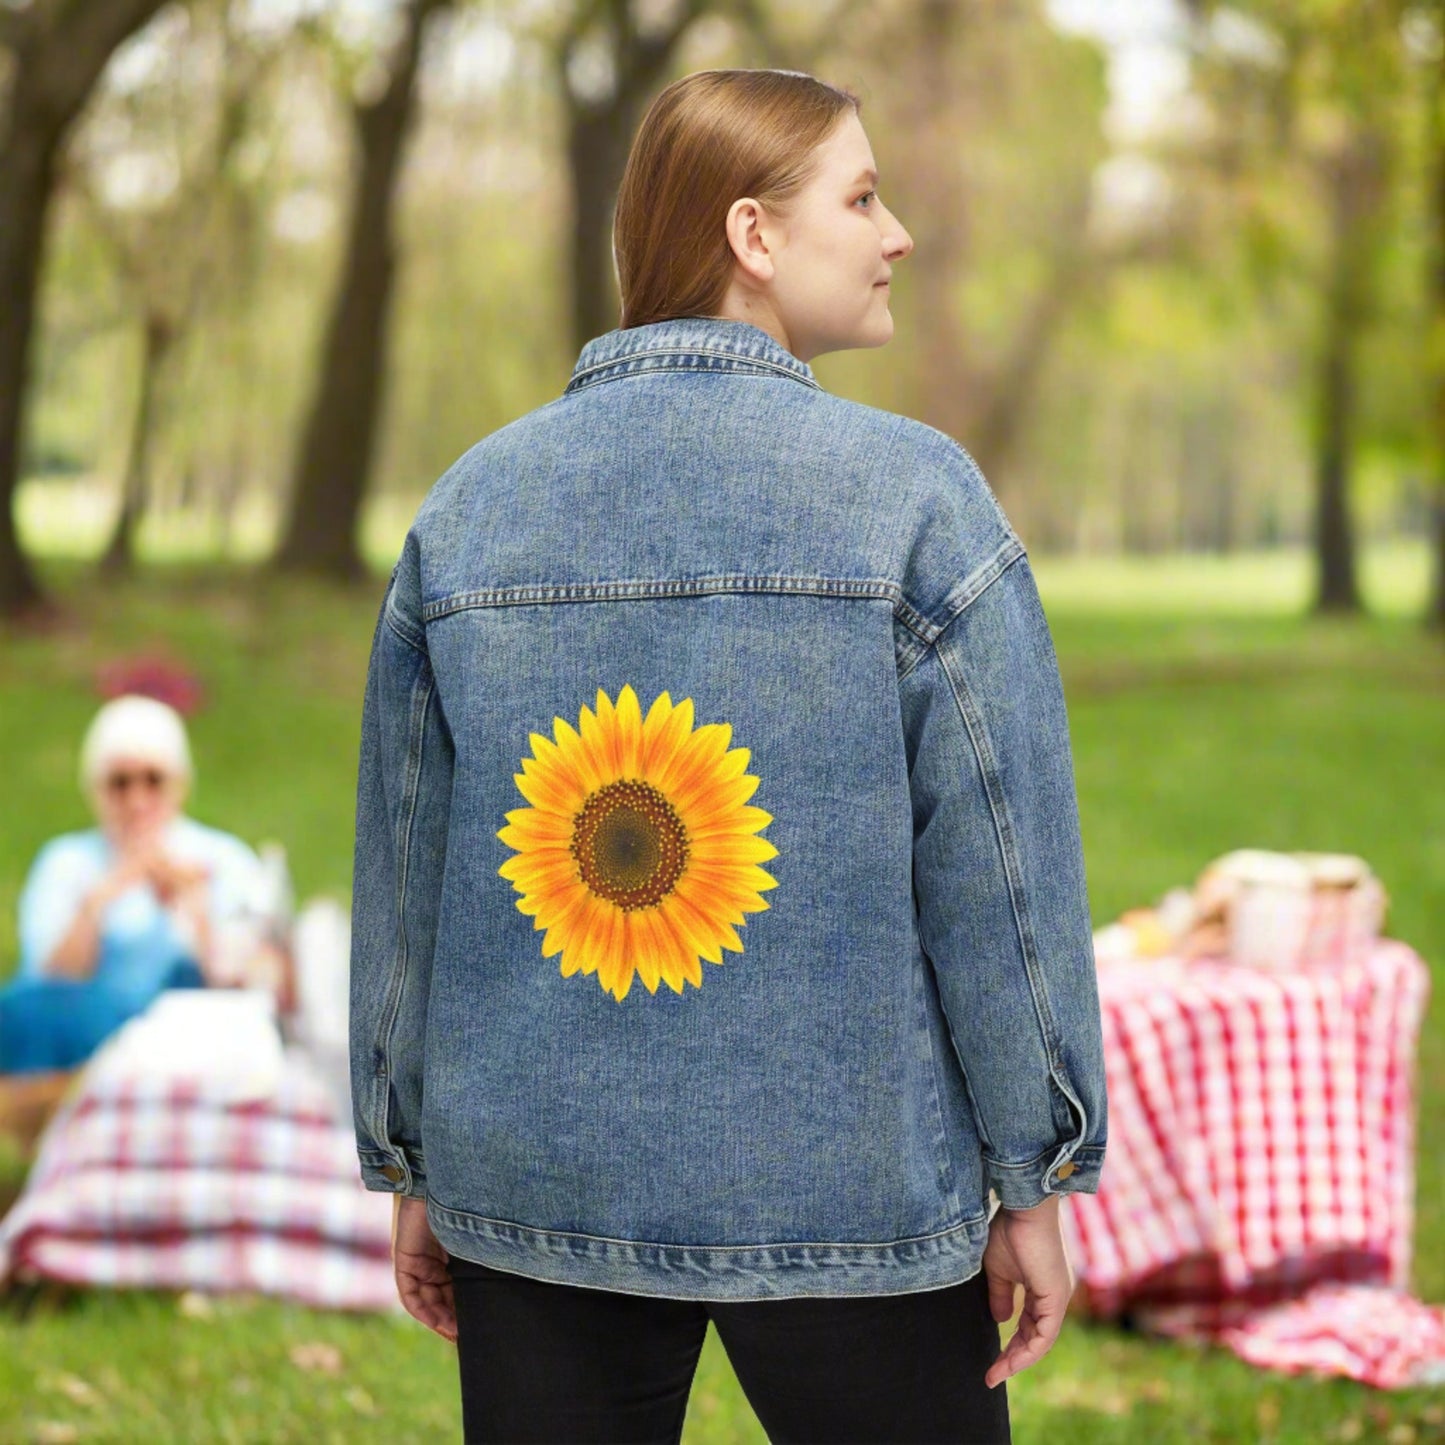 Back of jacket as modeled by a woman